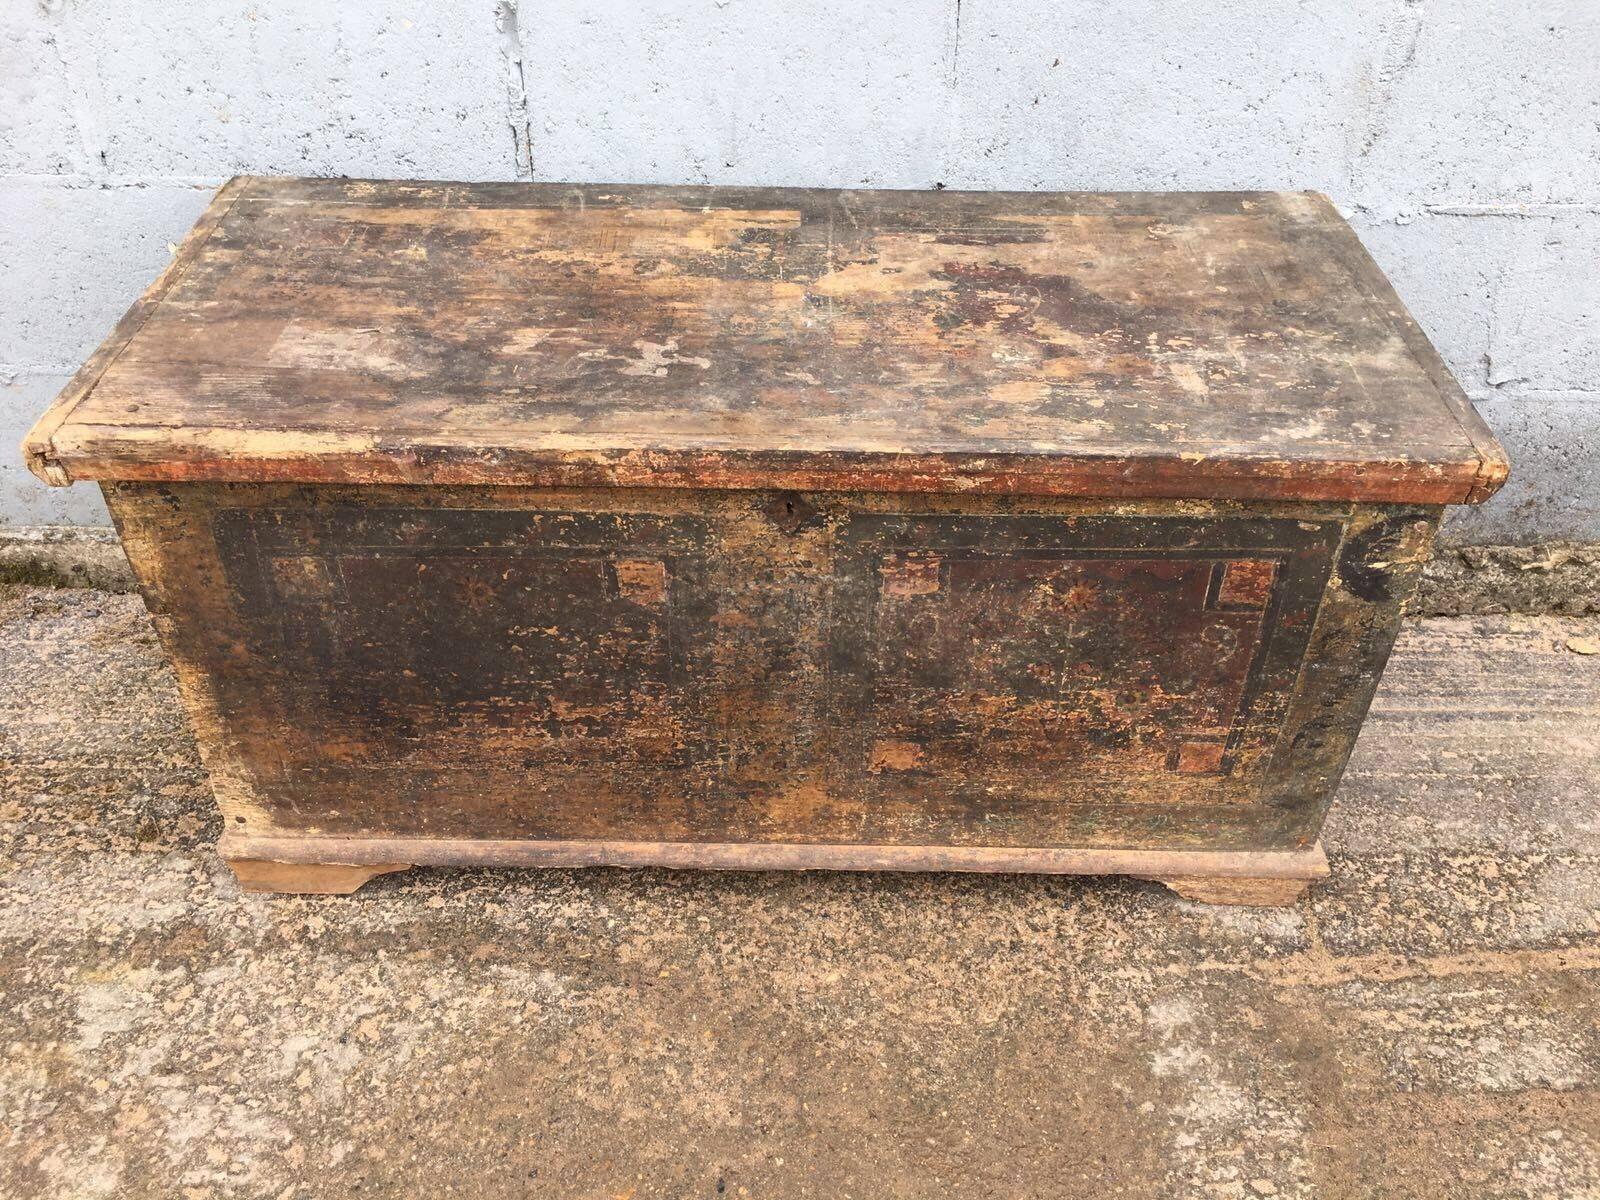 DIMENSIONS- 114cm wide, 55cm tall, 50cm deep.
 

Stunning and original European marriage chest. These trunks/chests are becoming harder and harder to source now and prices have increased rapidly over the past 6 months. Very on trend!


I have